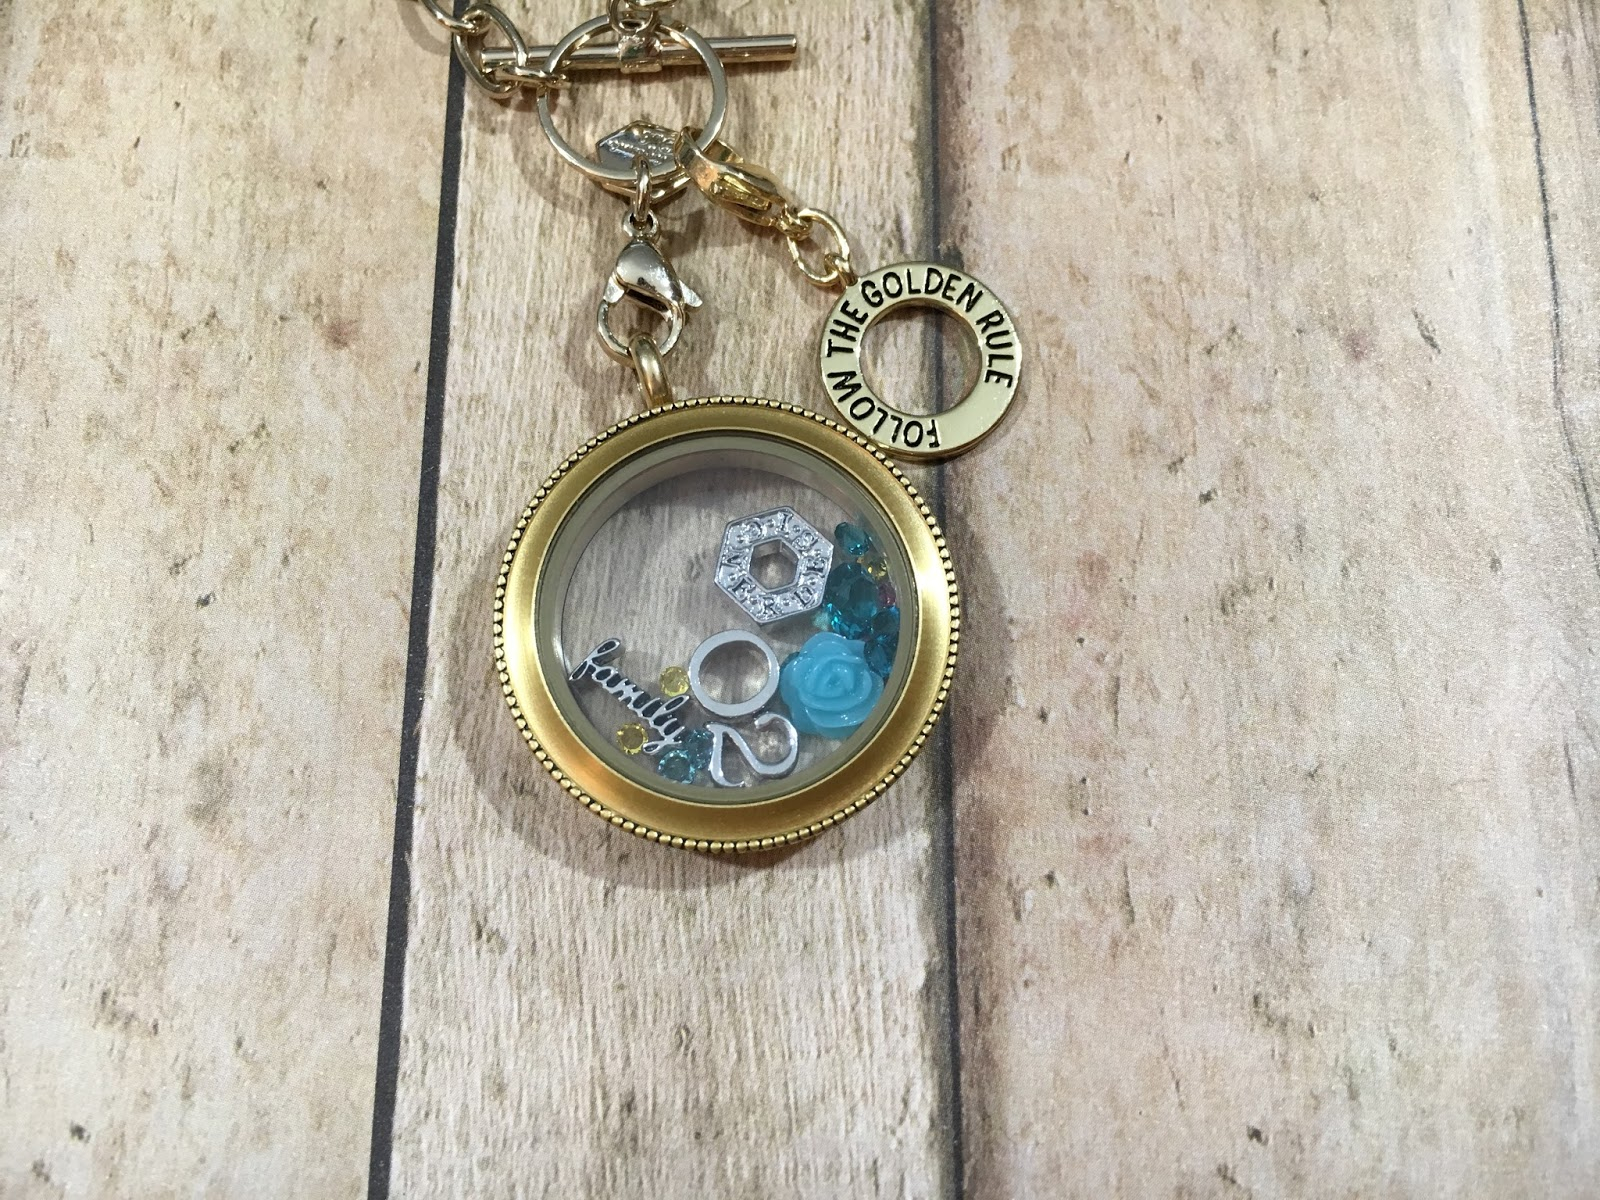 Origami Owl Family Five Sixteenths Blog Trend Tuesday How To Build A Living Locket